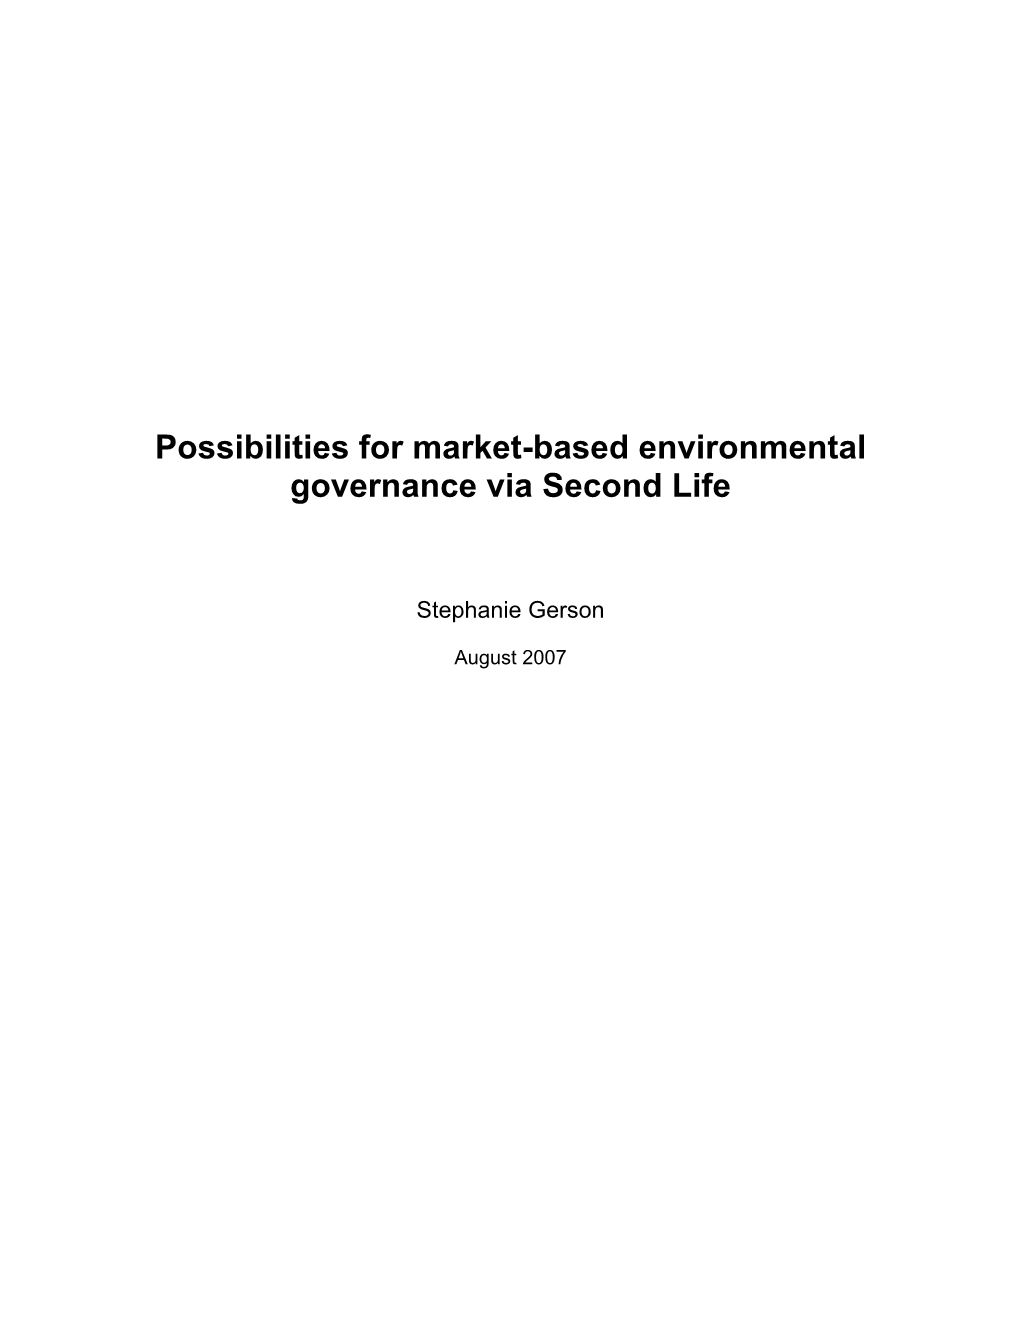 Possibilities for Market-Based Environmental Governance Via Second Life